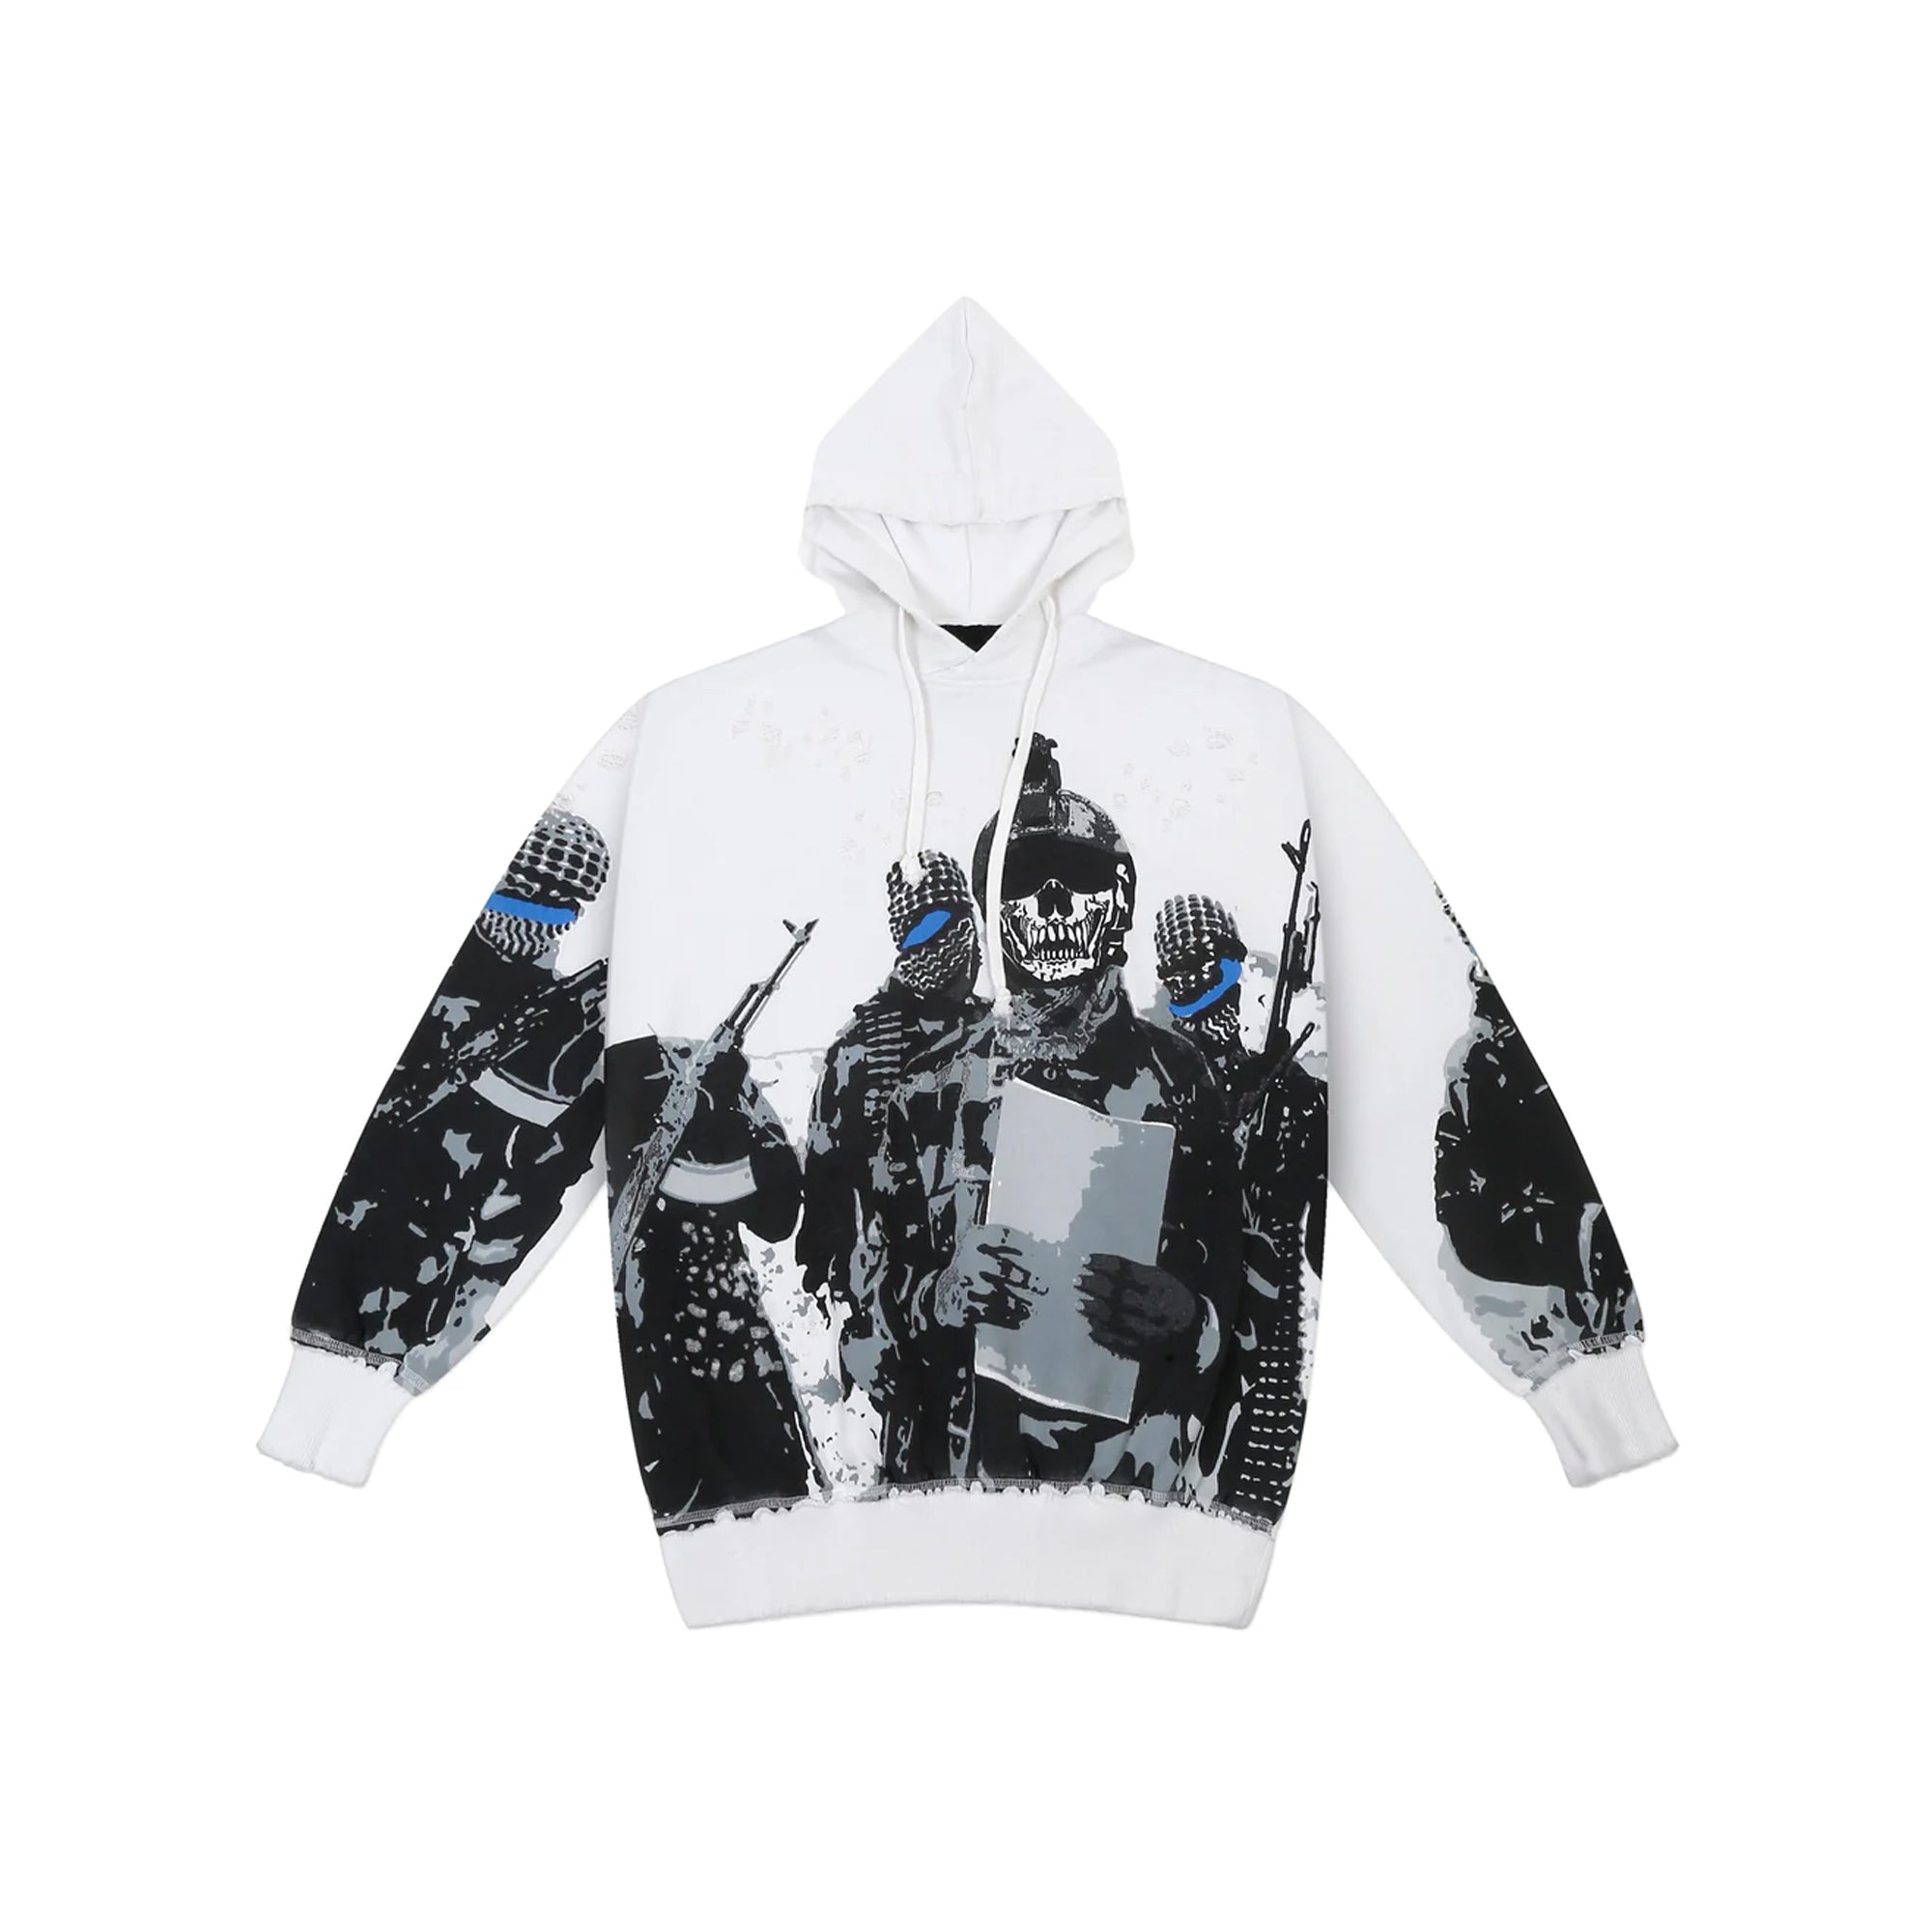 Hoodie - White "Shoot At Sight"